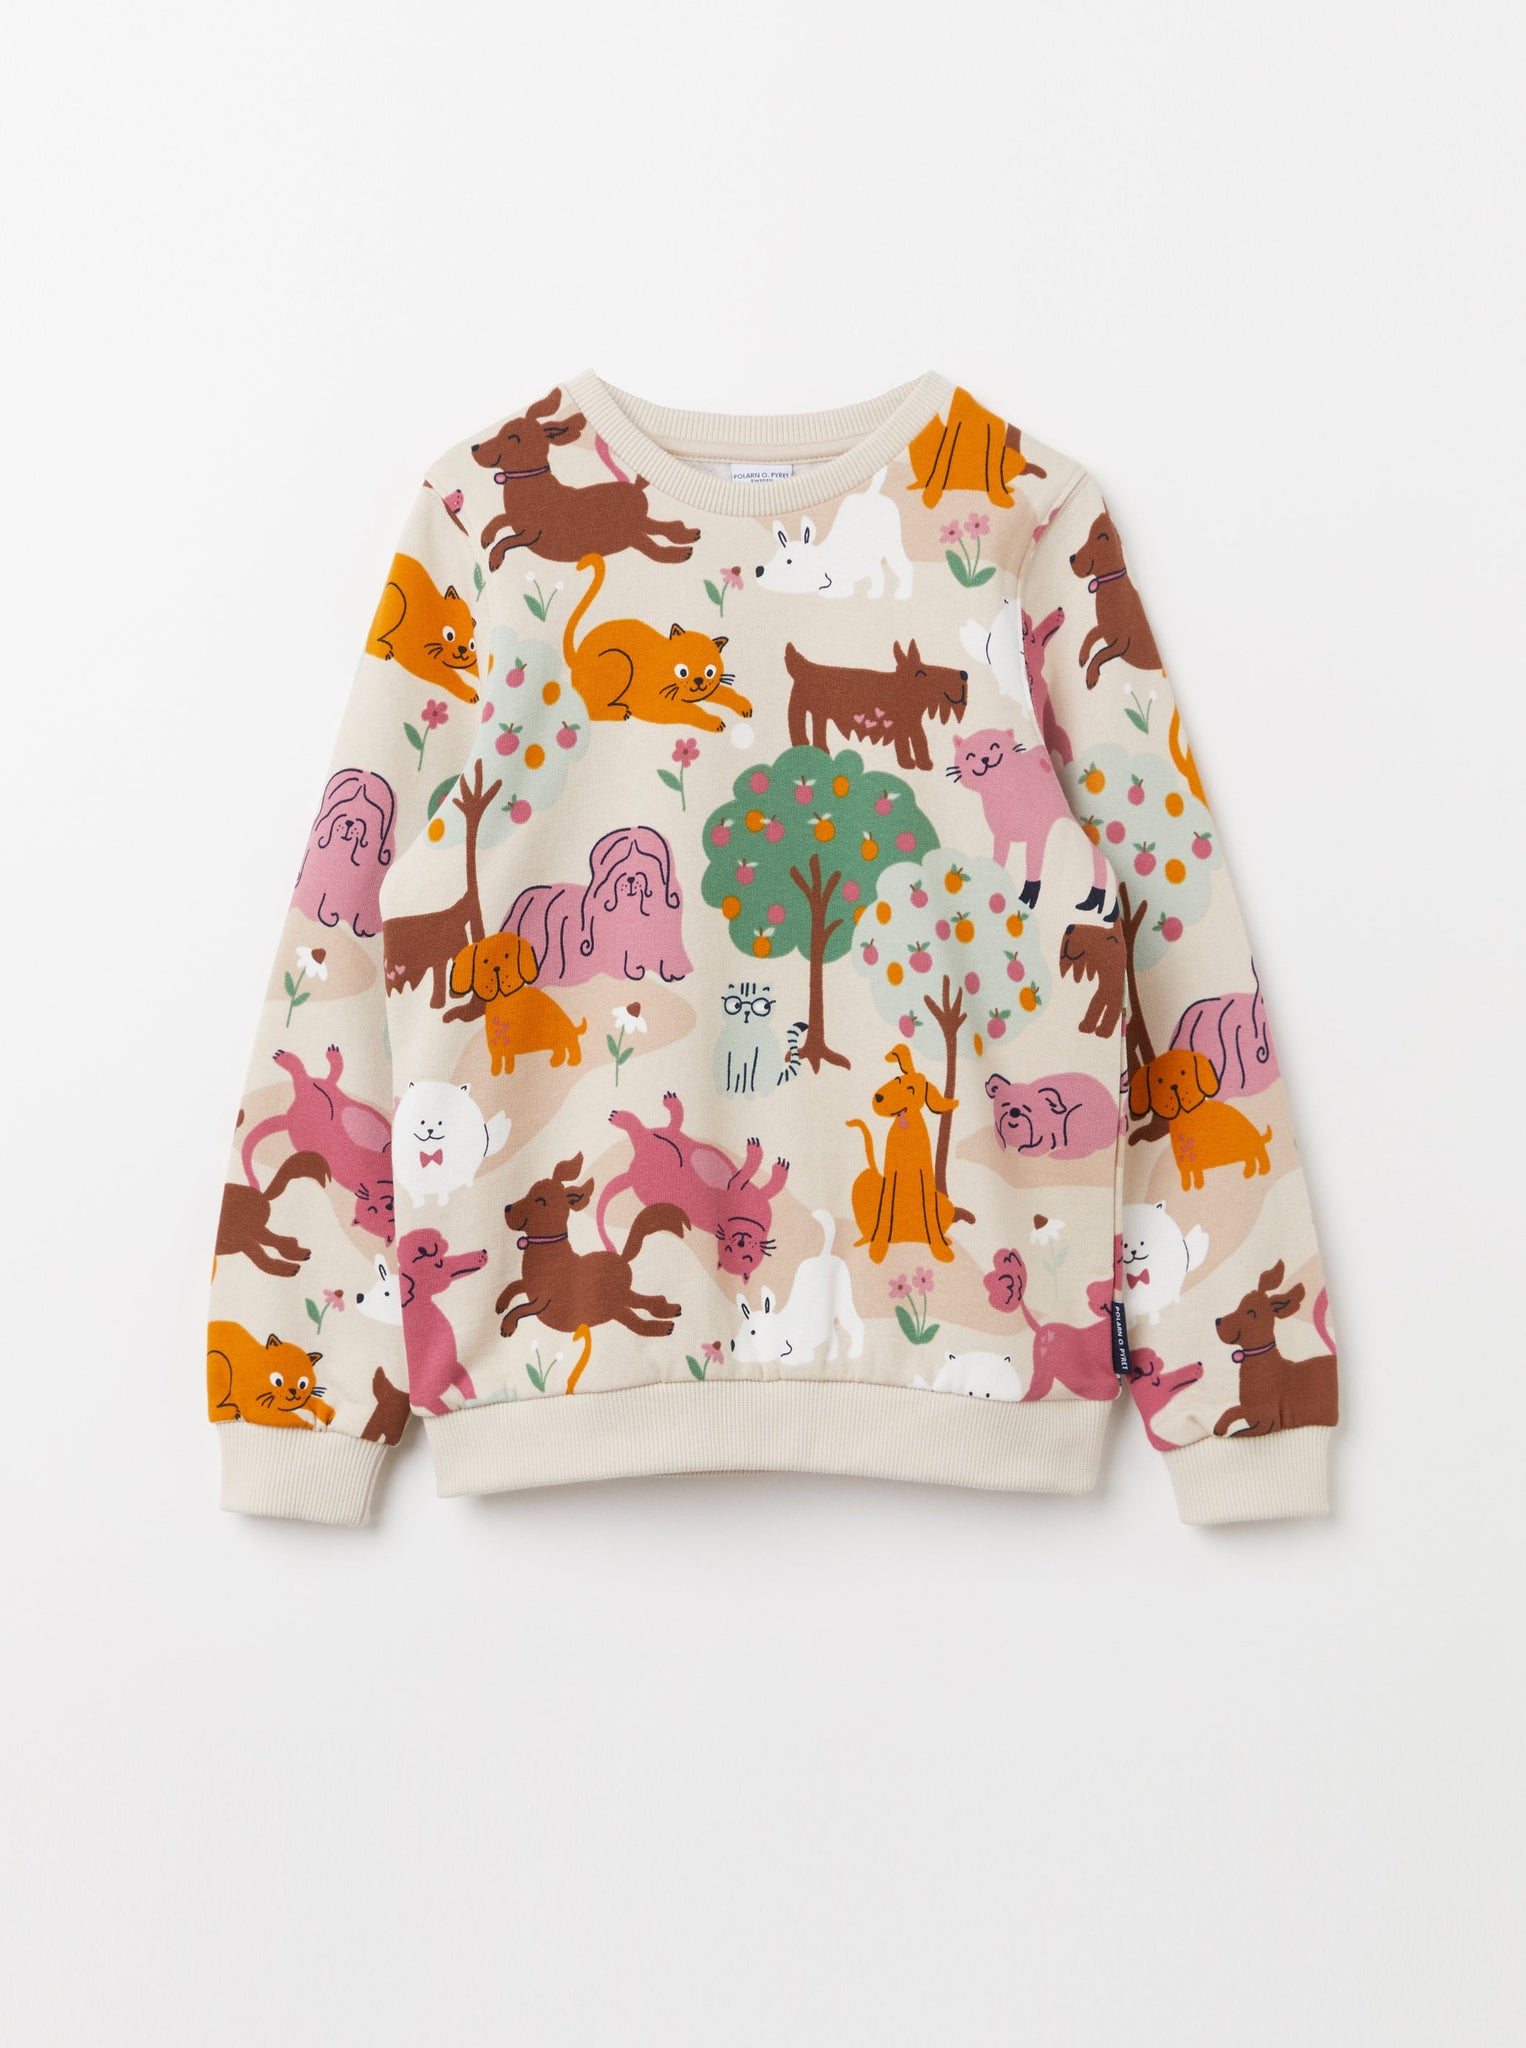 Organic Cotton Cat & Dog Kids Sweatshirt from the Polarn O. Pyret Kidswear collection. The best ethical kids clothes